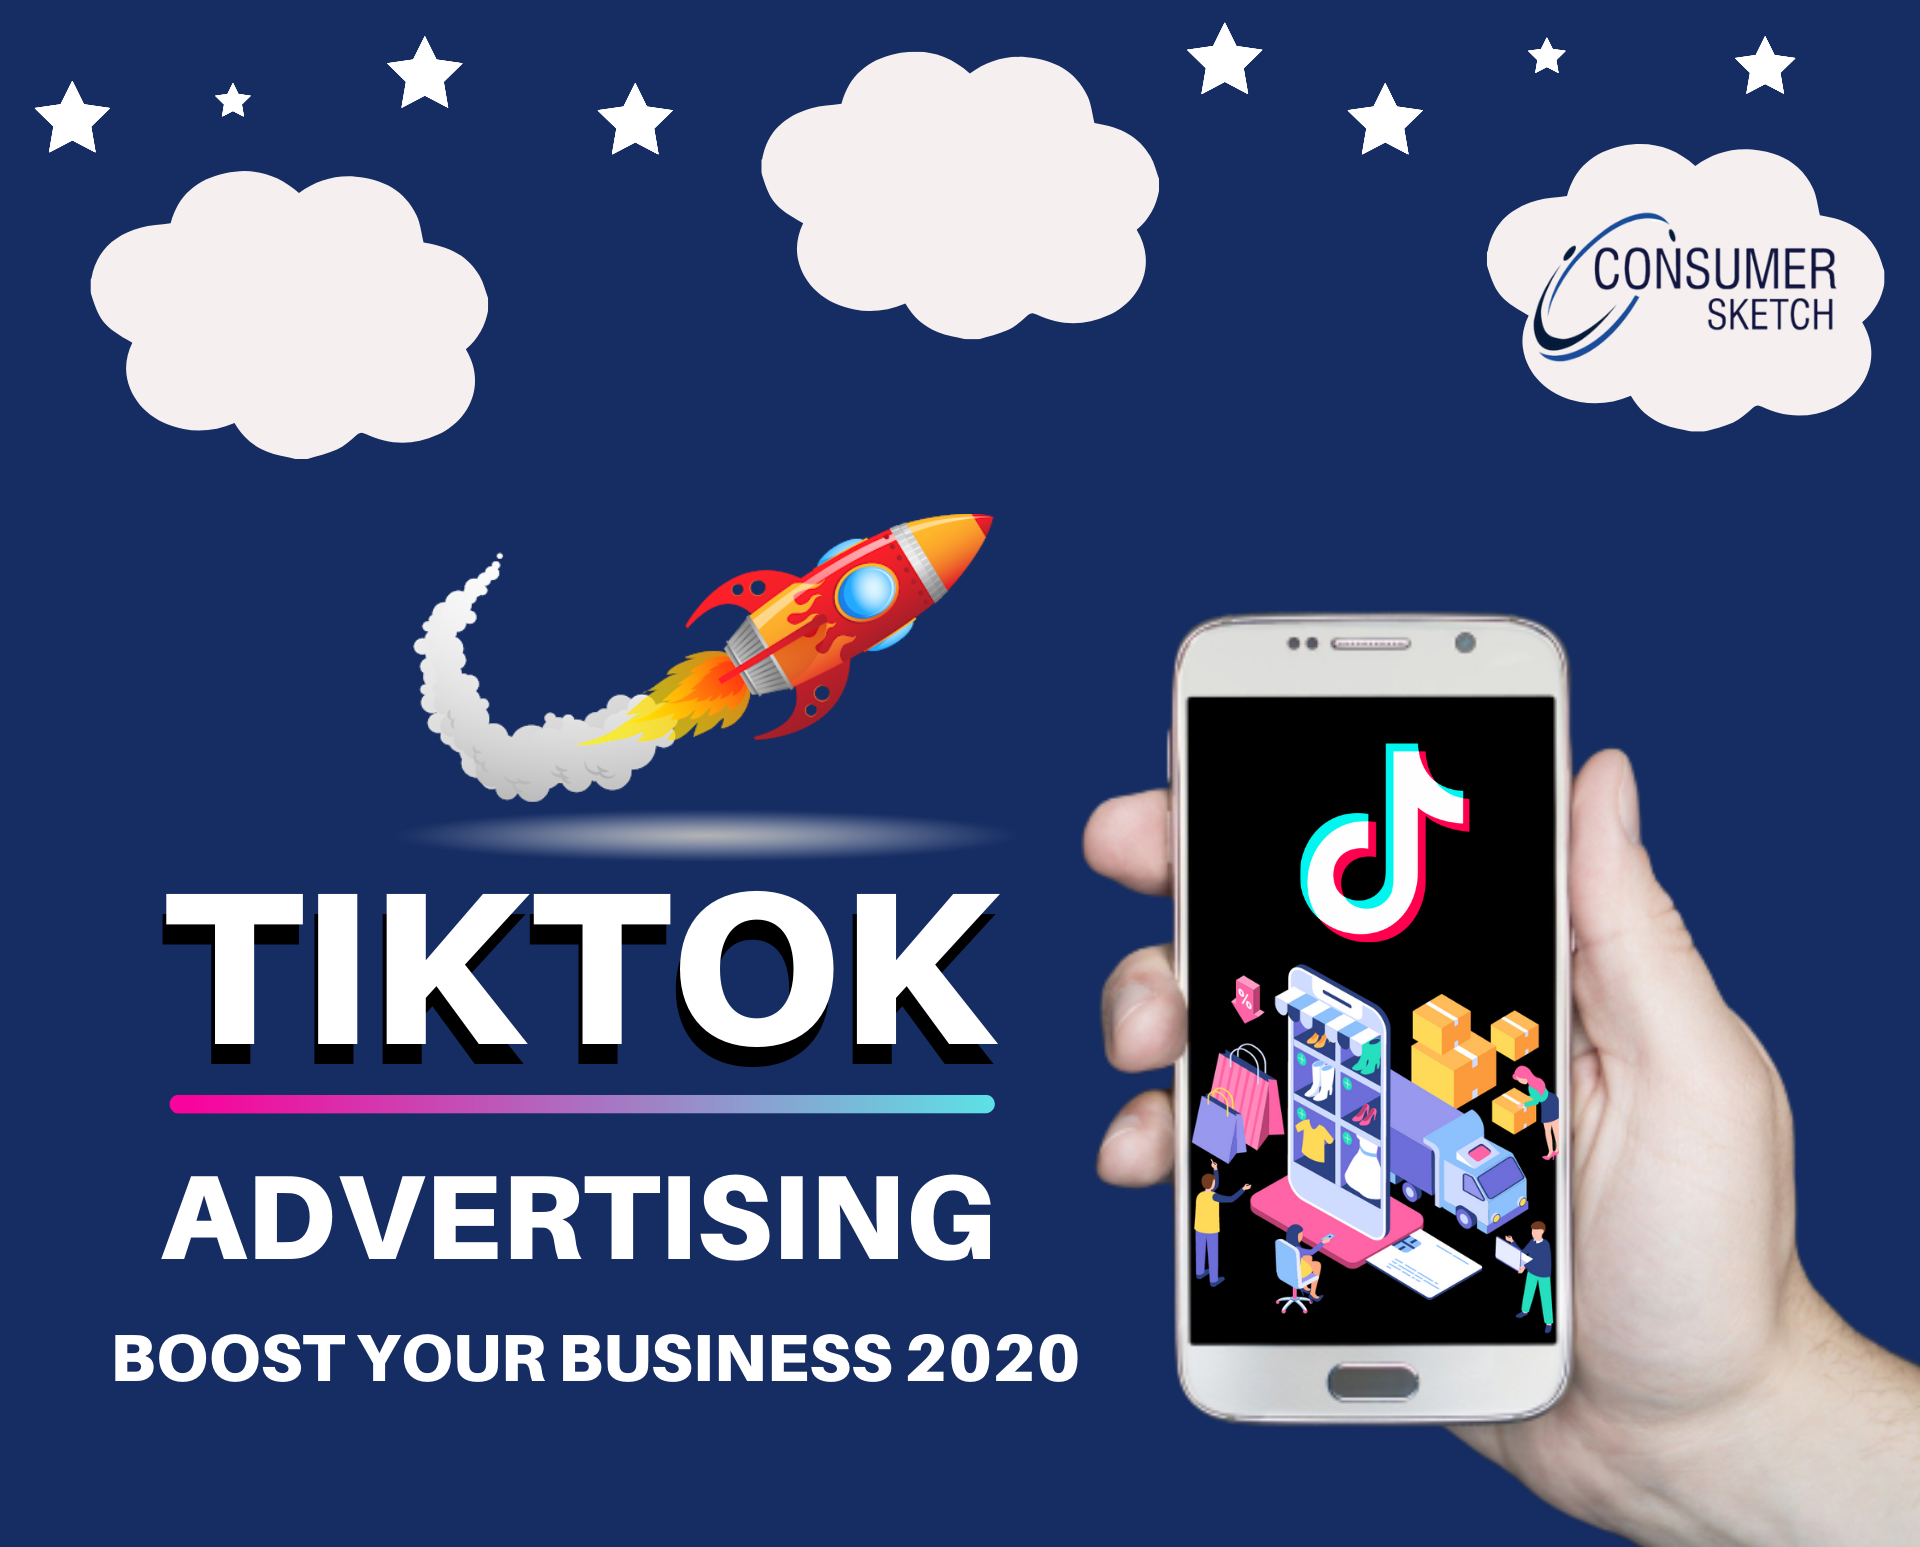 TikTok For Business: A New Way To Boost Your Business